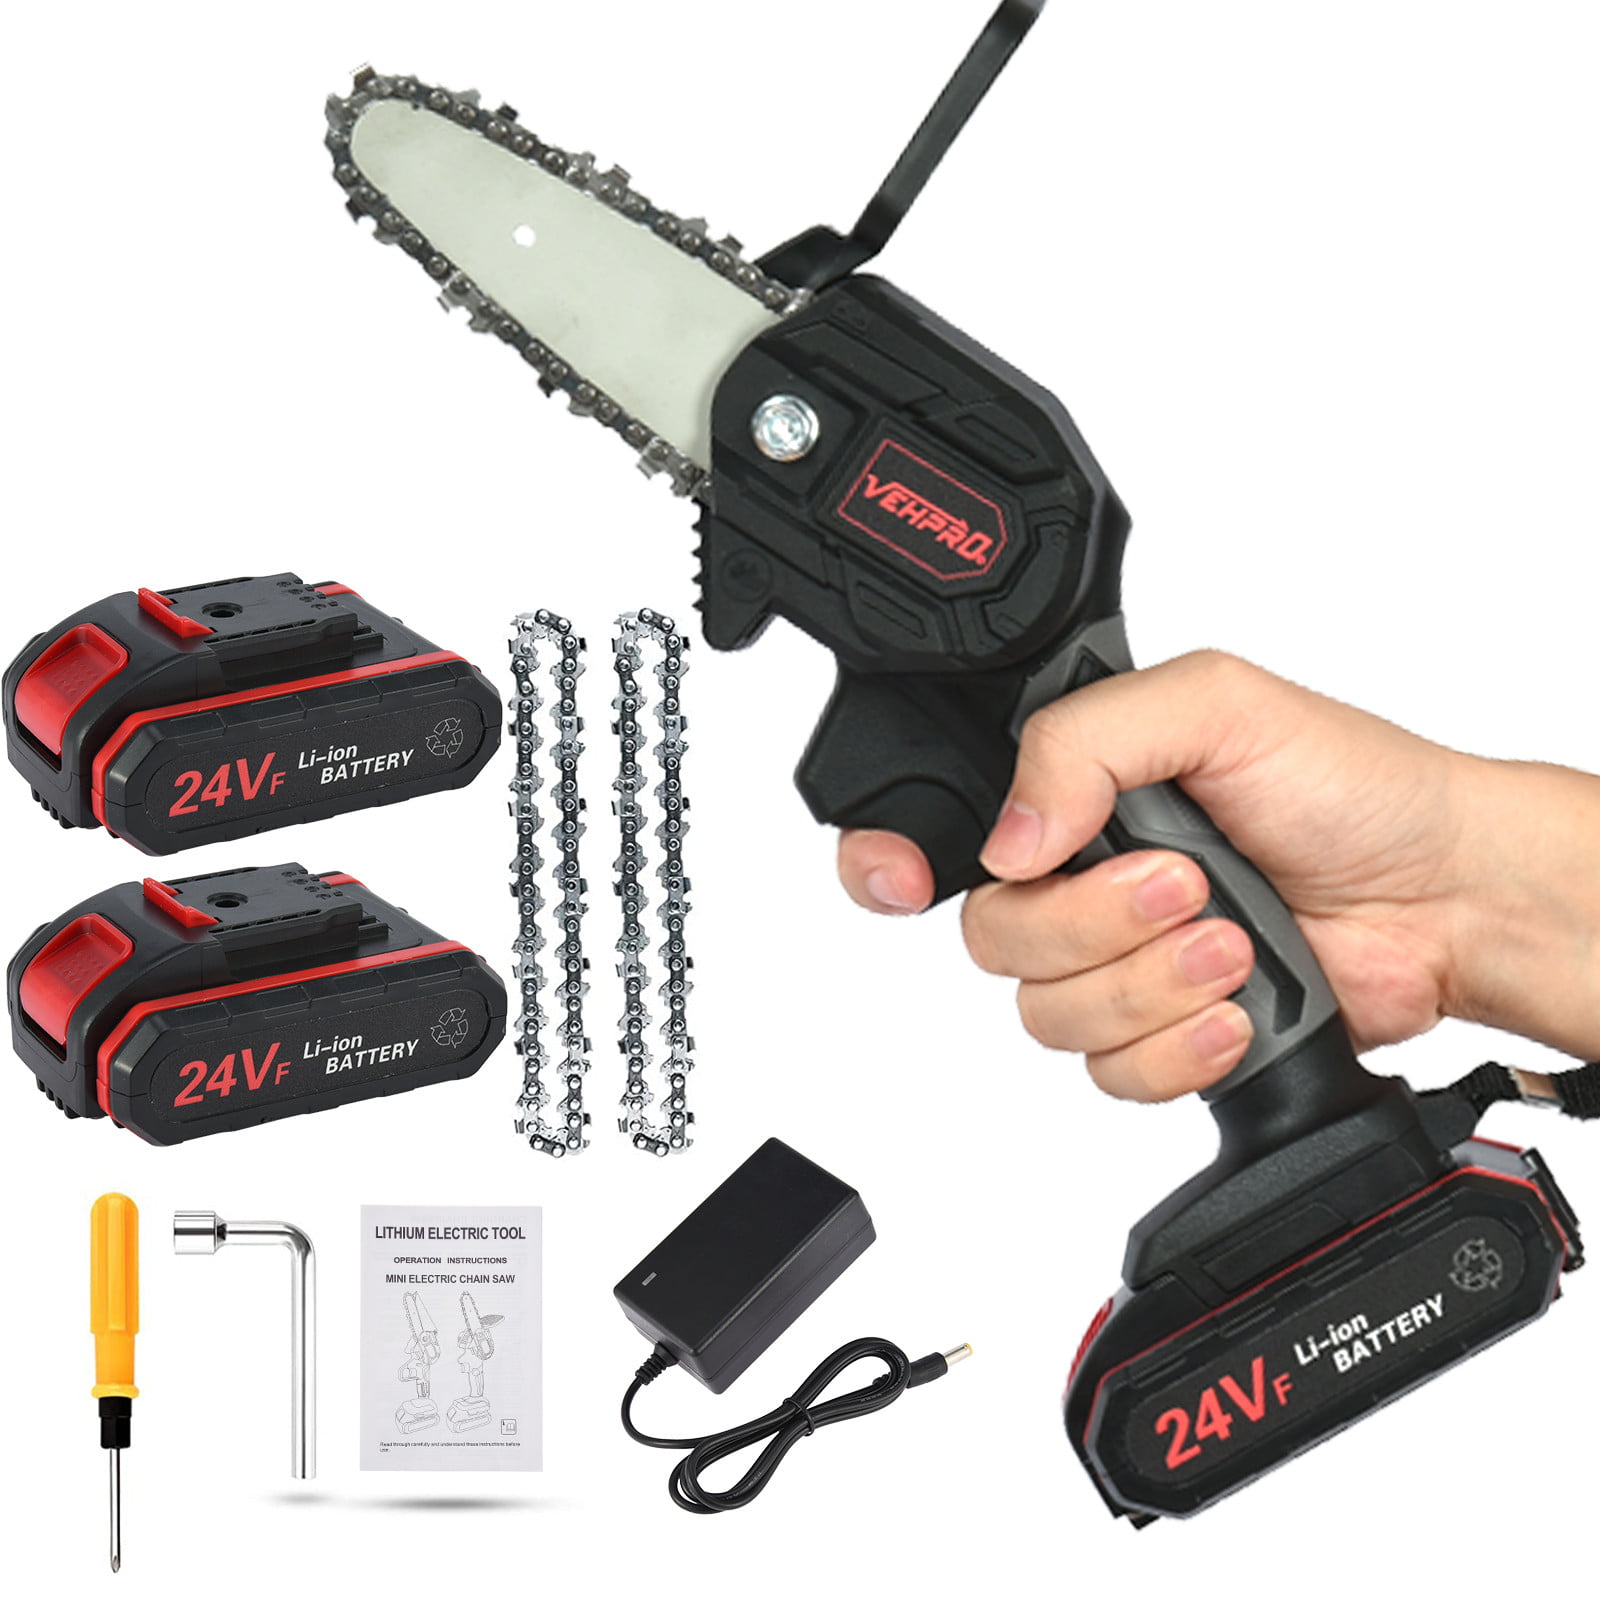 Cordless Electric Chain Saw Wood Cutter Mini One-Hand Saw Woodworking w/ Battery